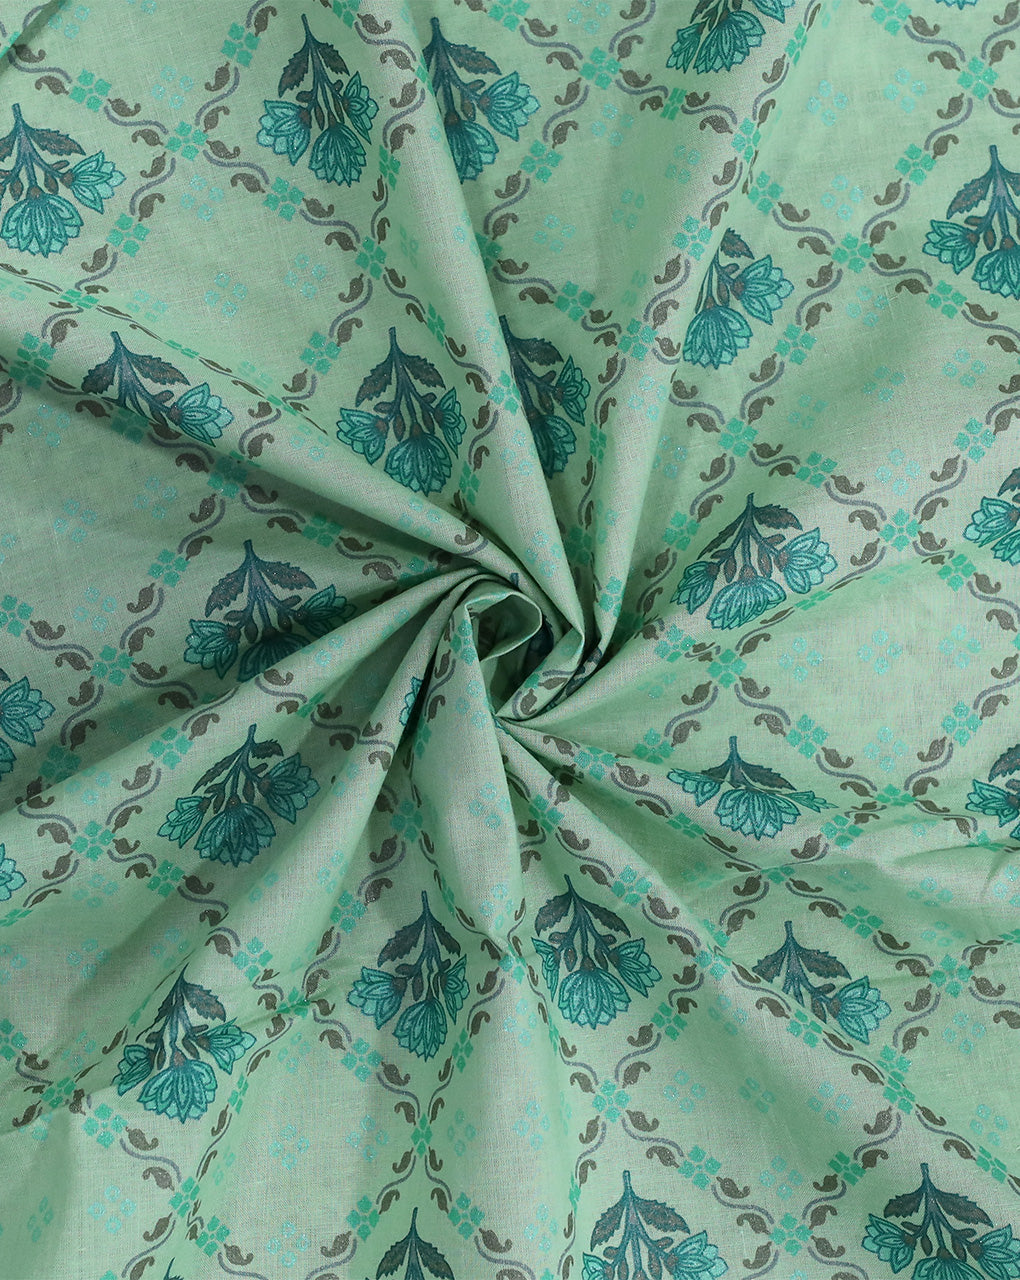 LIGHT GREEN FLORAL DESIGN COTTON PRINTED FABRIC